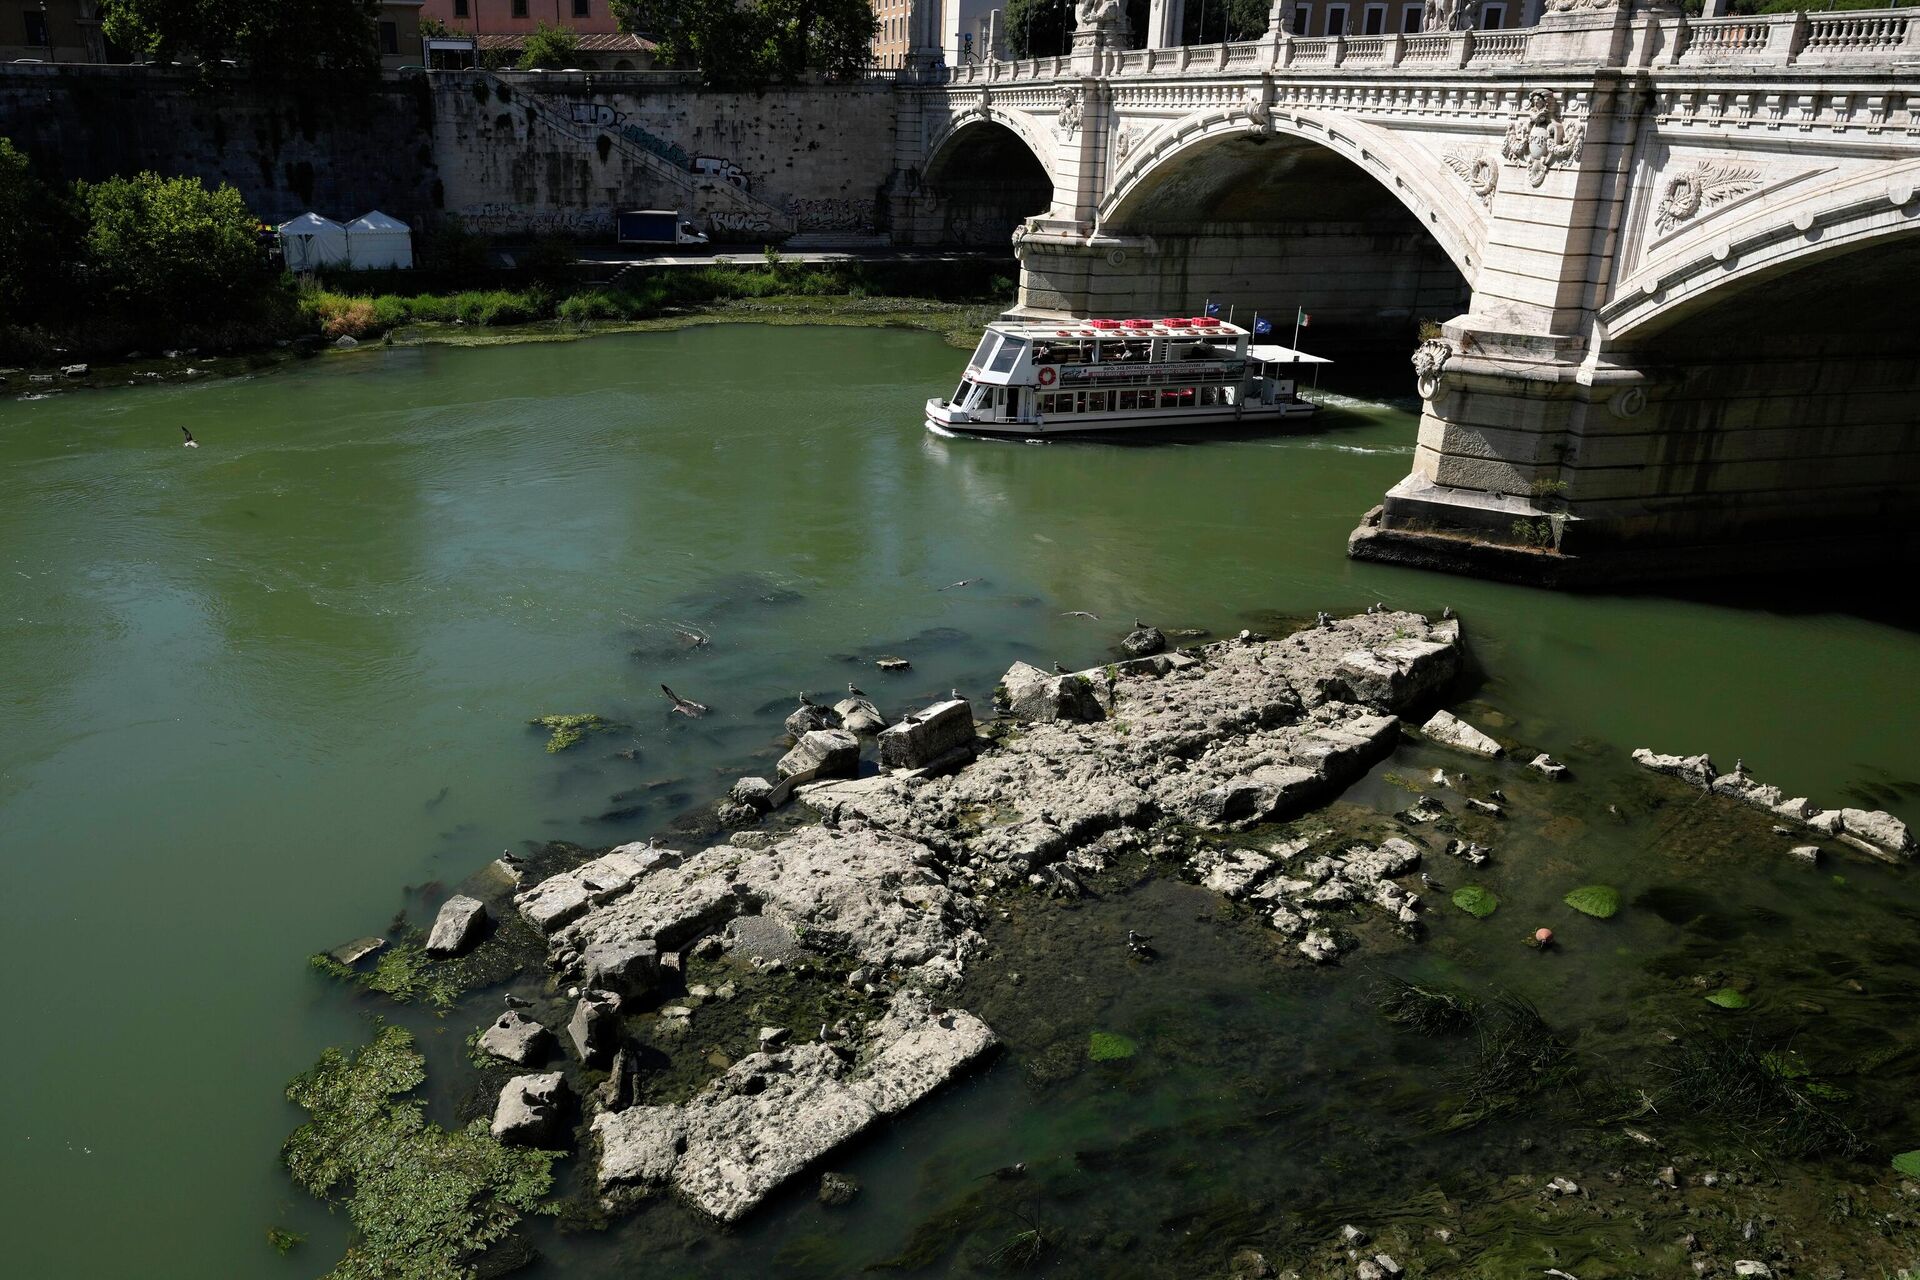 A boat passes by the ruins of the ancient Roman Neronian bridge, usually submerged by the Tiber, in Rome, Thursday, June 30, 2022 - Sputnik International, 1920, 25.08.2022